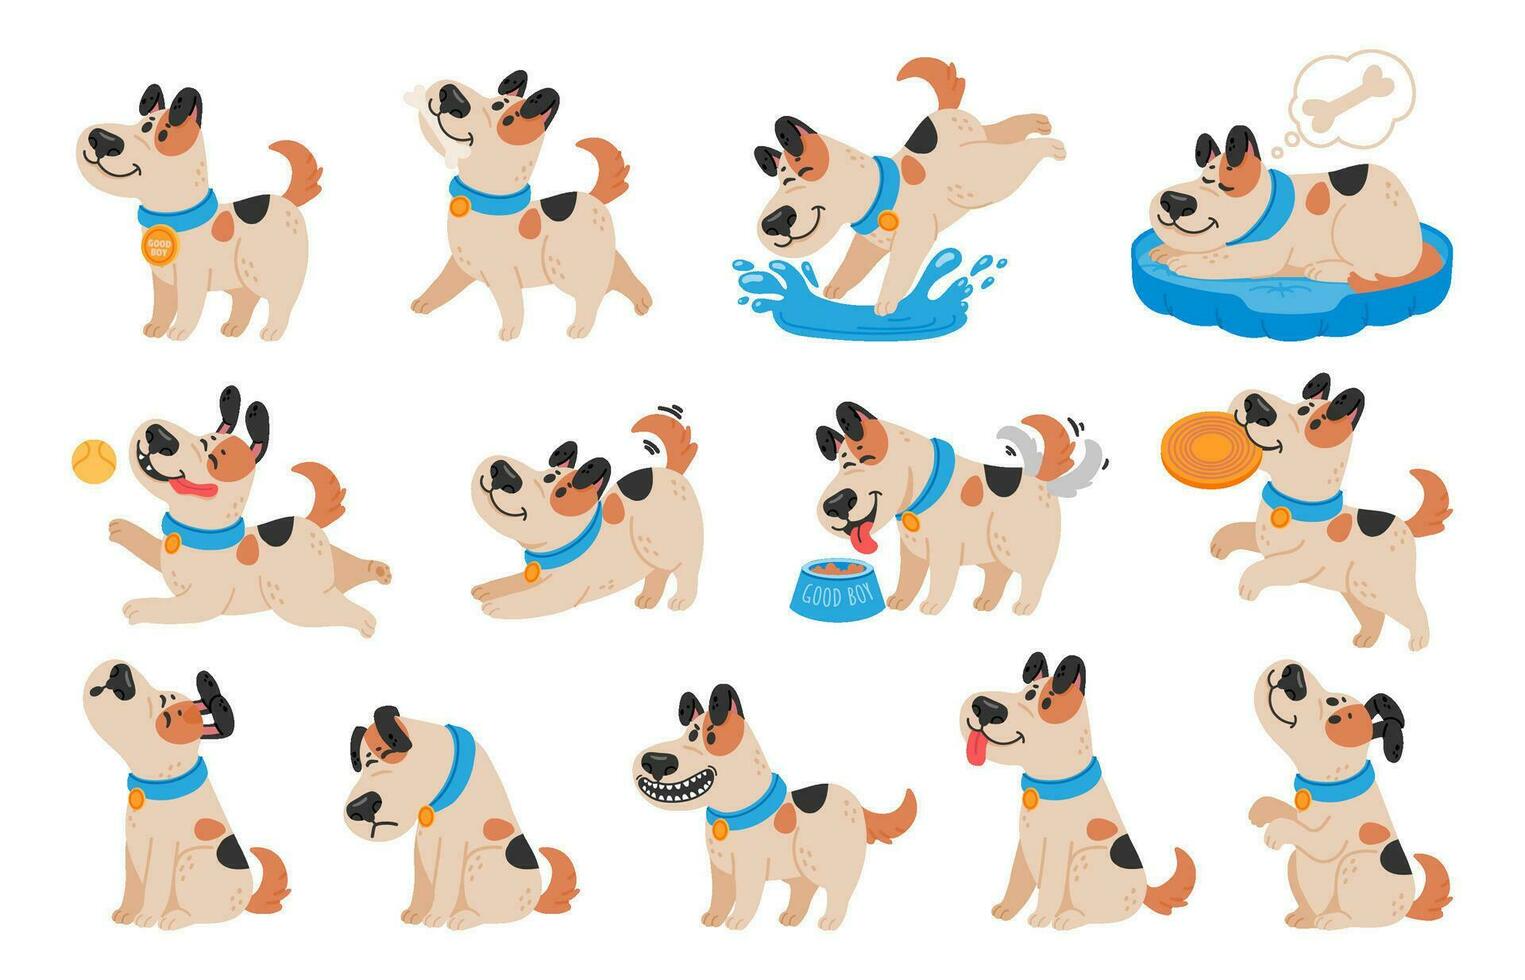 Cartoon dog. Active pet animal, cute puppy and dogs in different poses, running, jumping and sleeping character vector illustration set